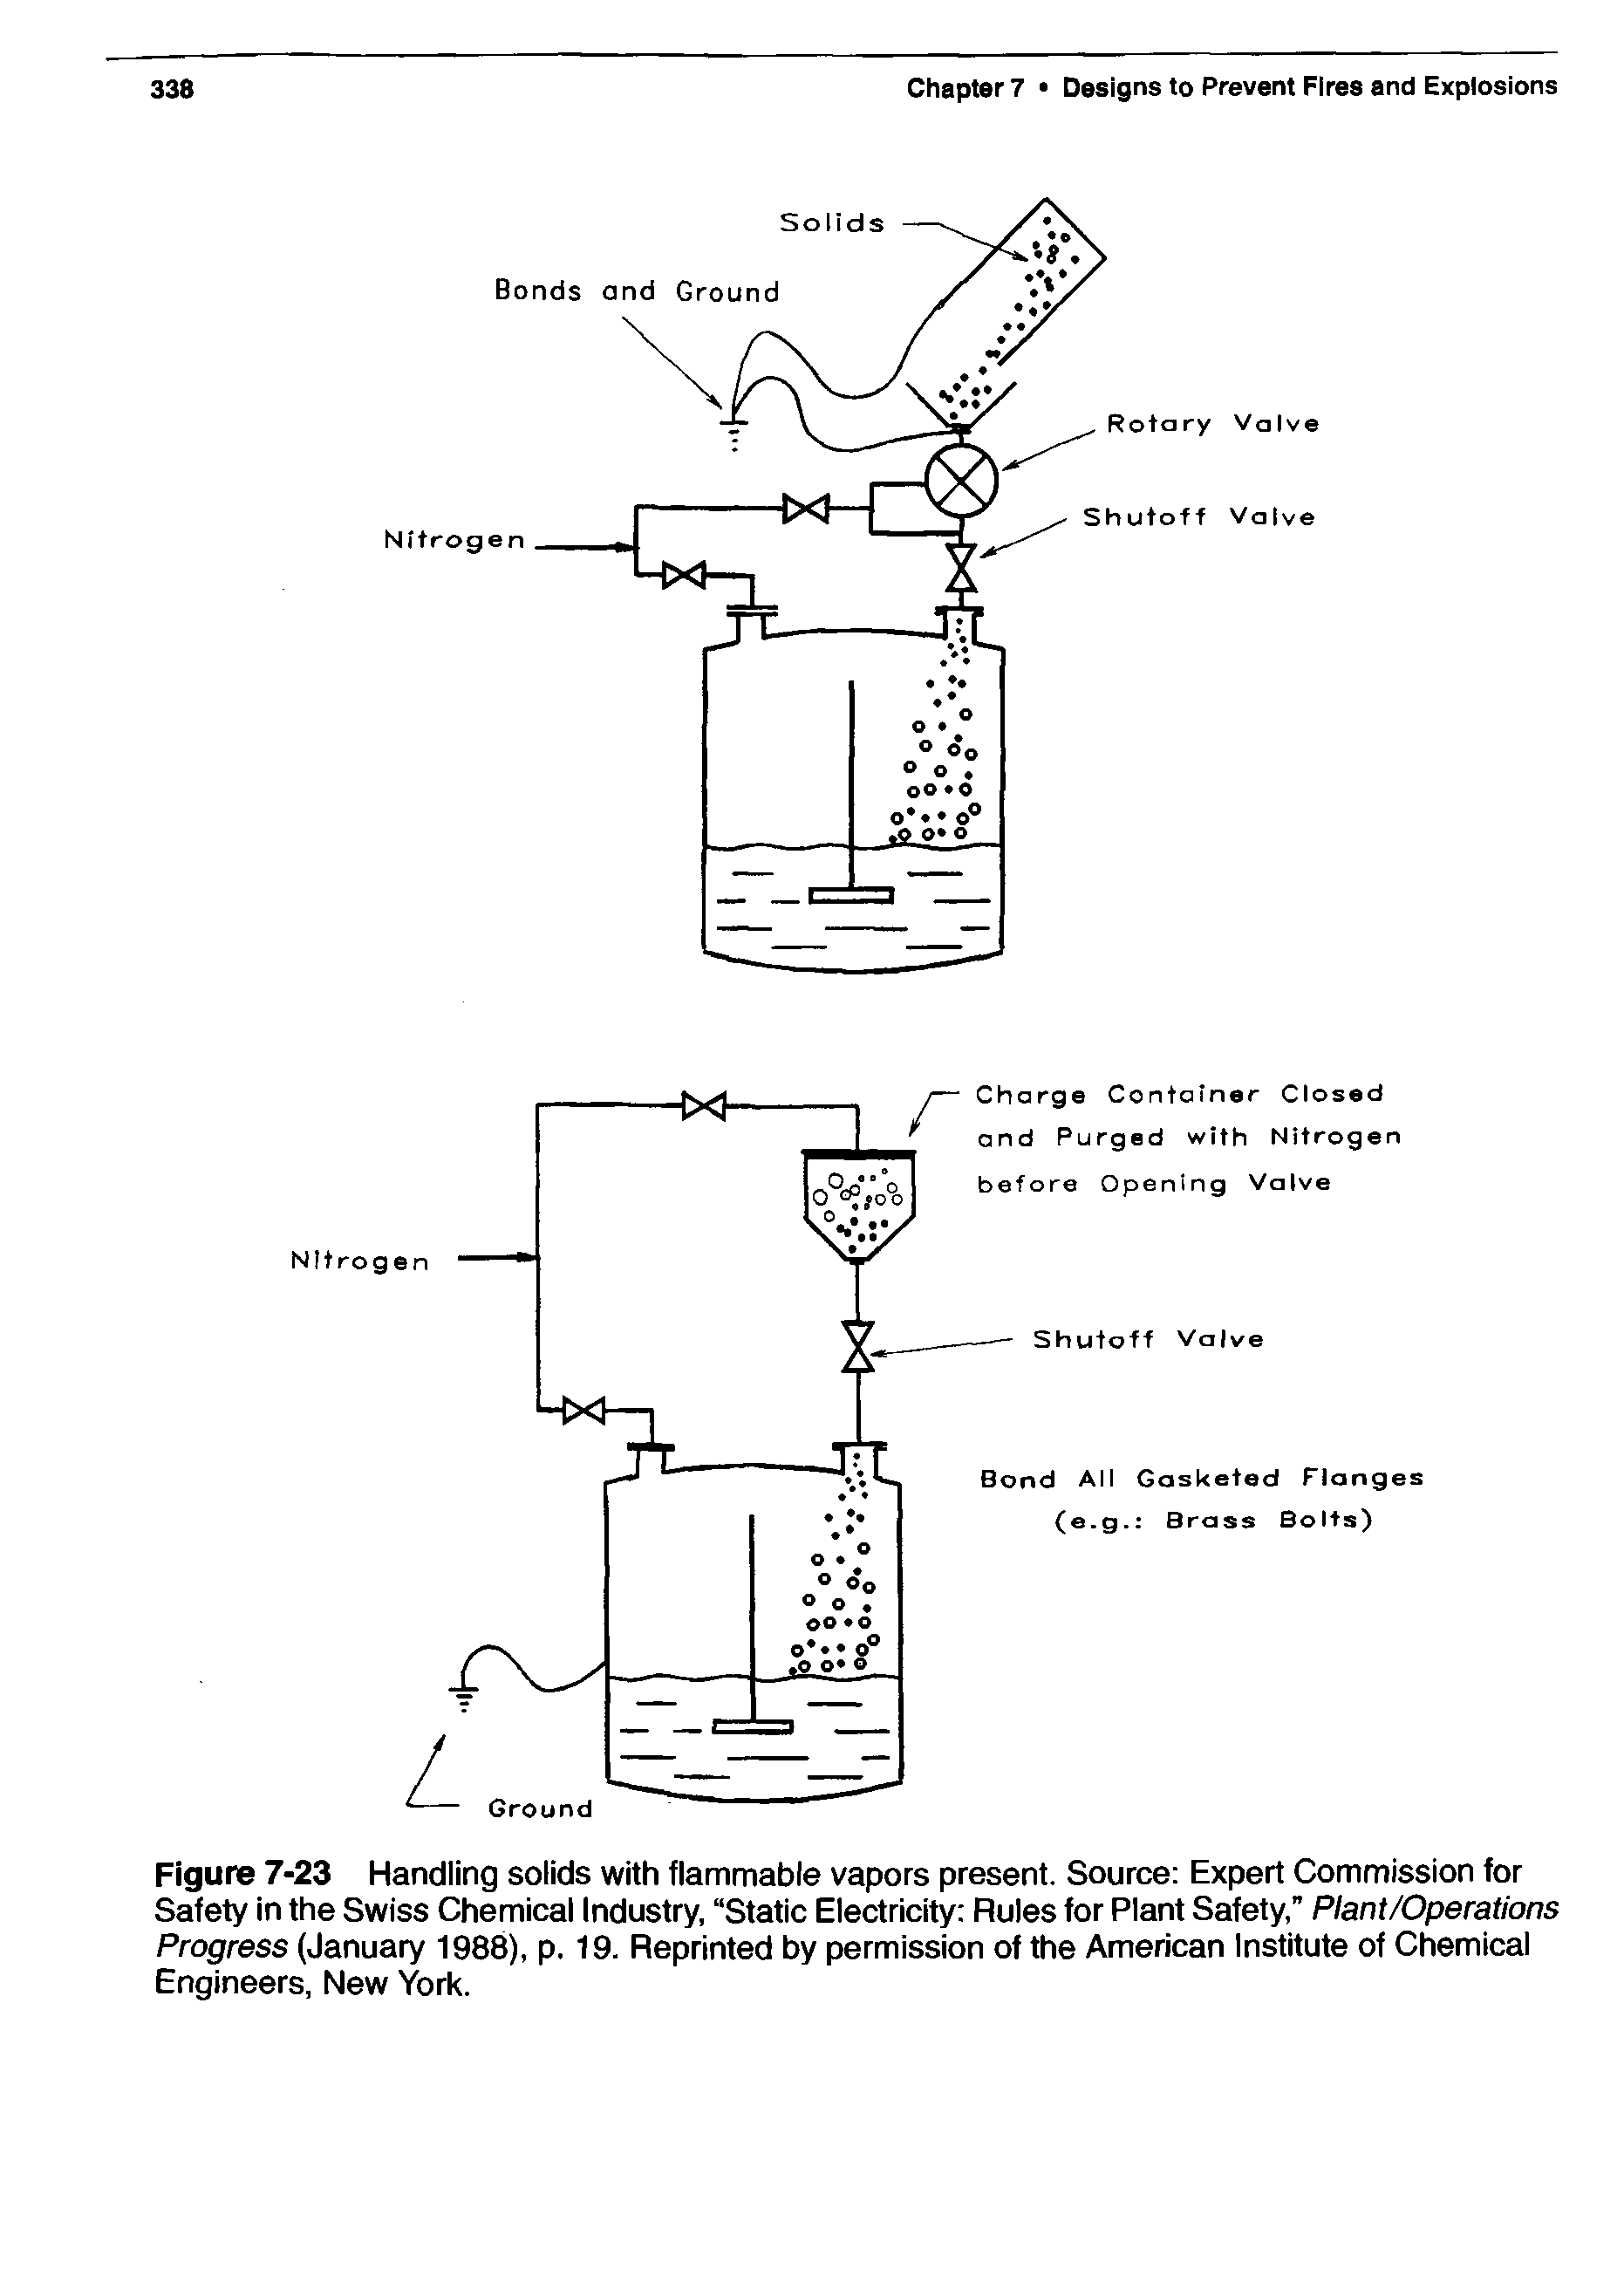 Figure 7-23 Handling solids with flammable vapors present. Source Expert Commission for Safety in the Swiss Chemical Industry, Static Electricity Rules for Plant Safety, Plant /Operations Progress (January 1988), p. 19. Reprinted by permission of the American Institute of Chemical Engineers, New York.